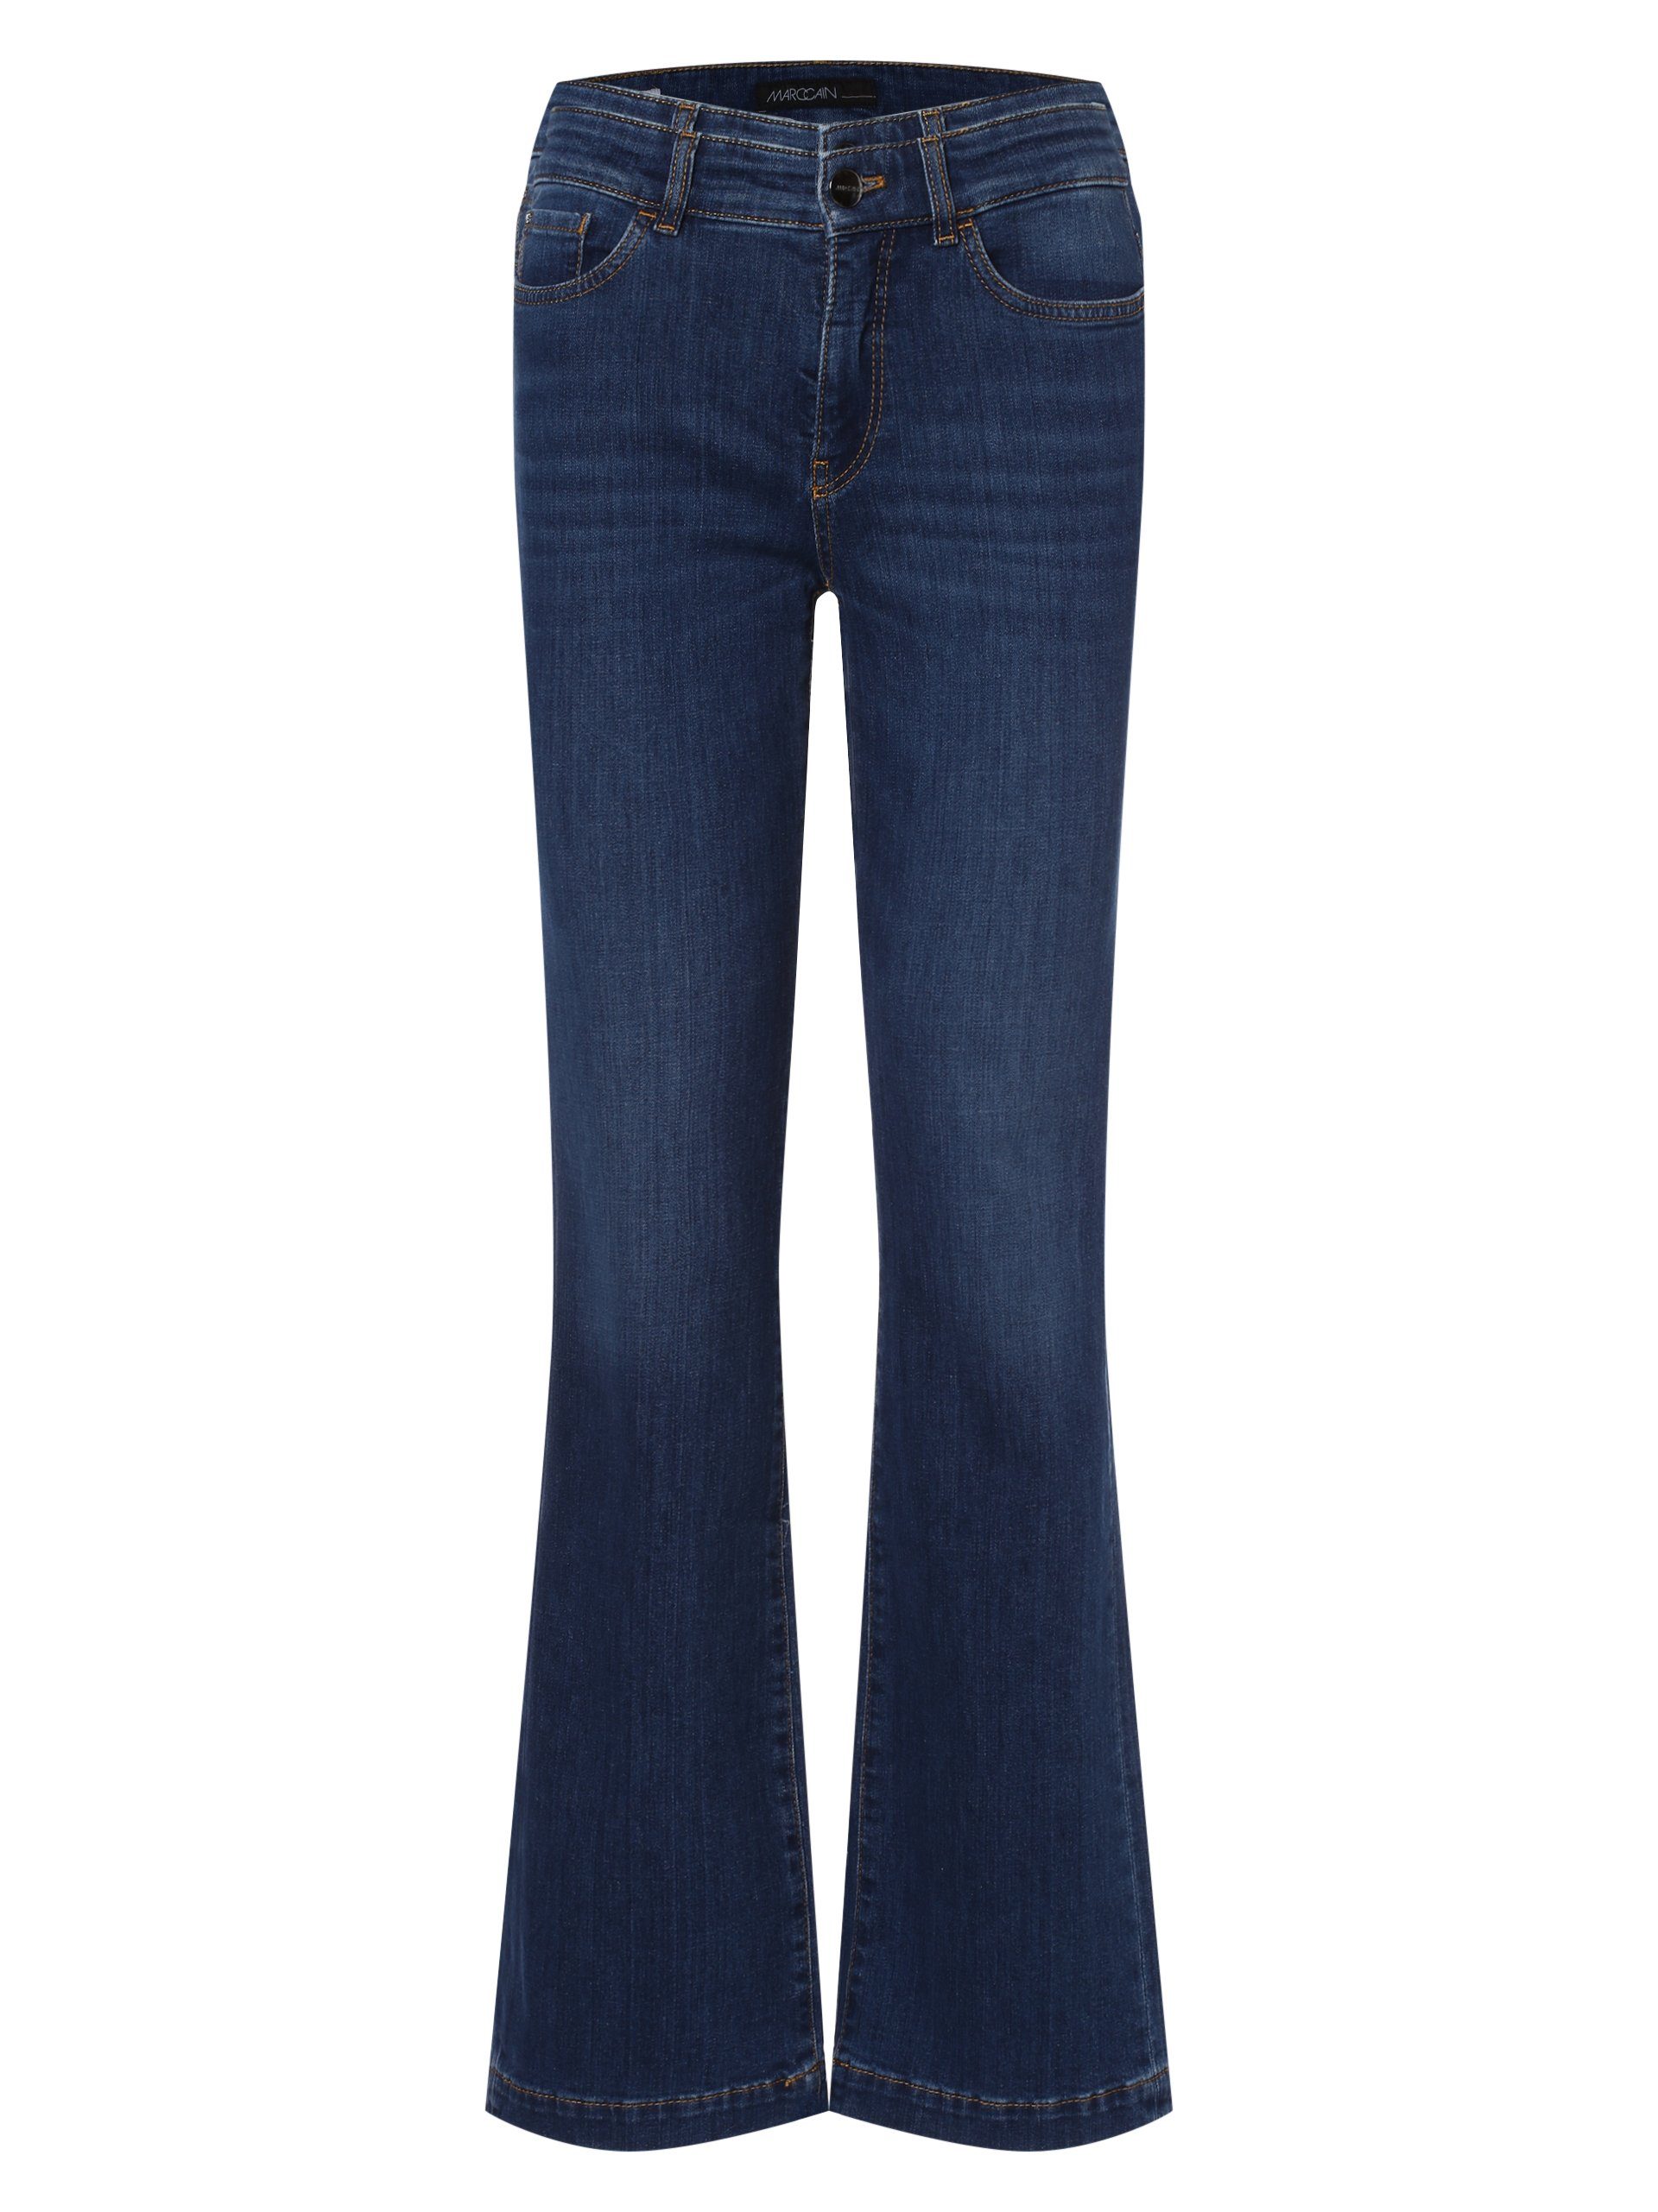 Faro Marc Jeans Cain Bequeme